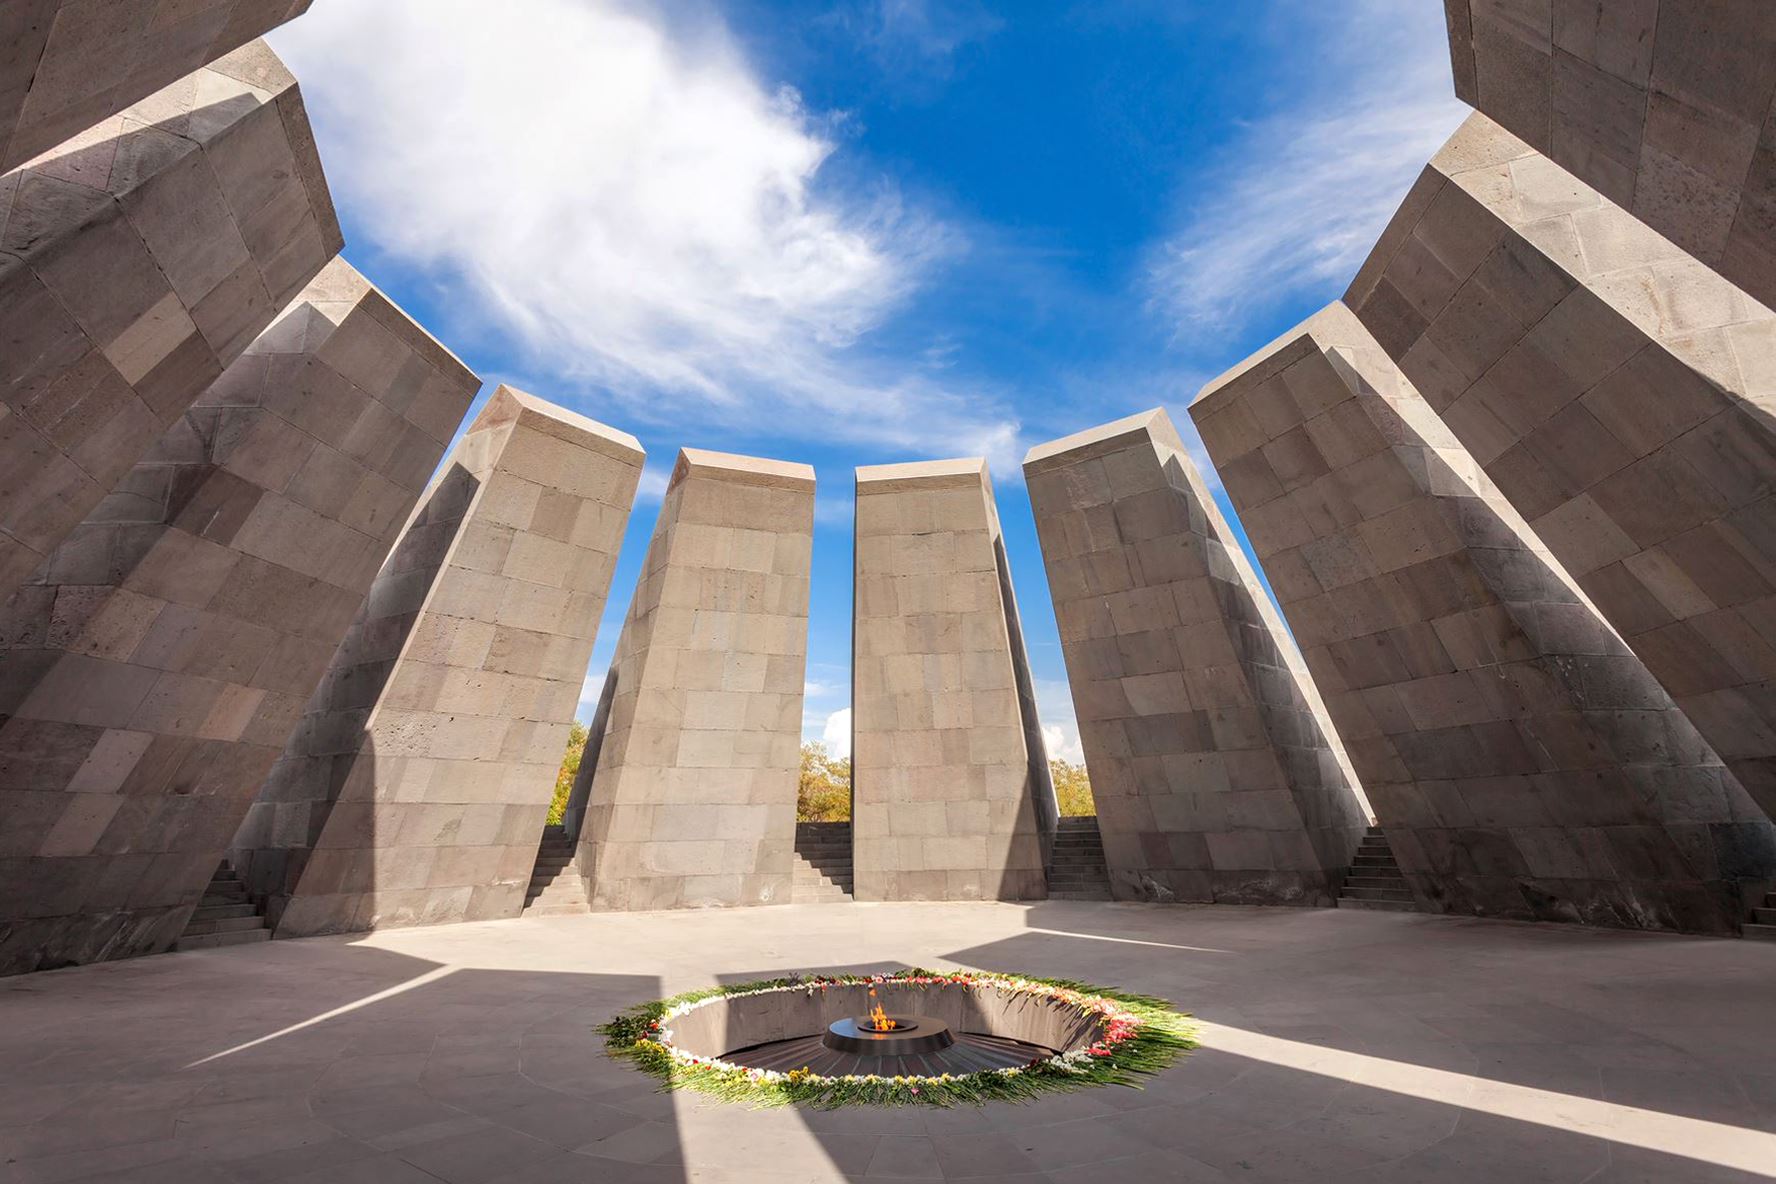 Photo of the Armenian Genocide Memorial complex, beneath a blue sky with white clouds.